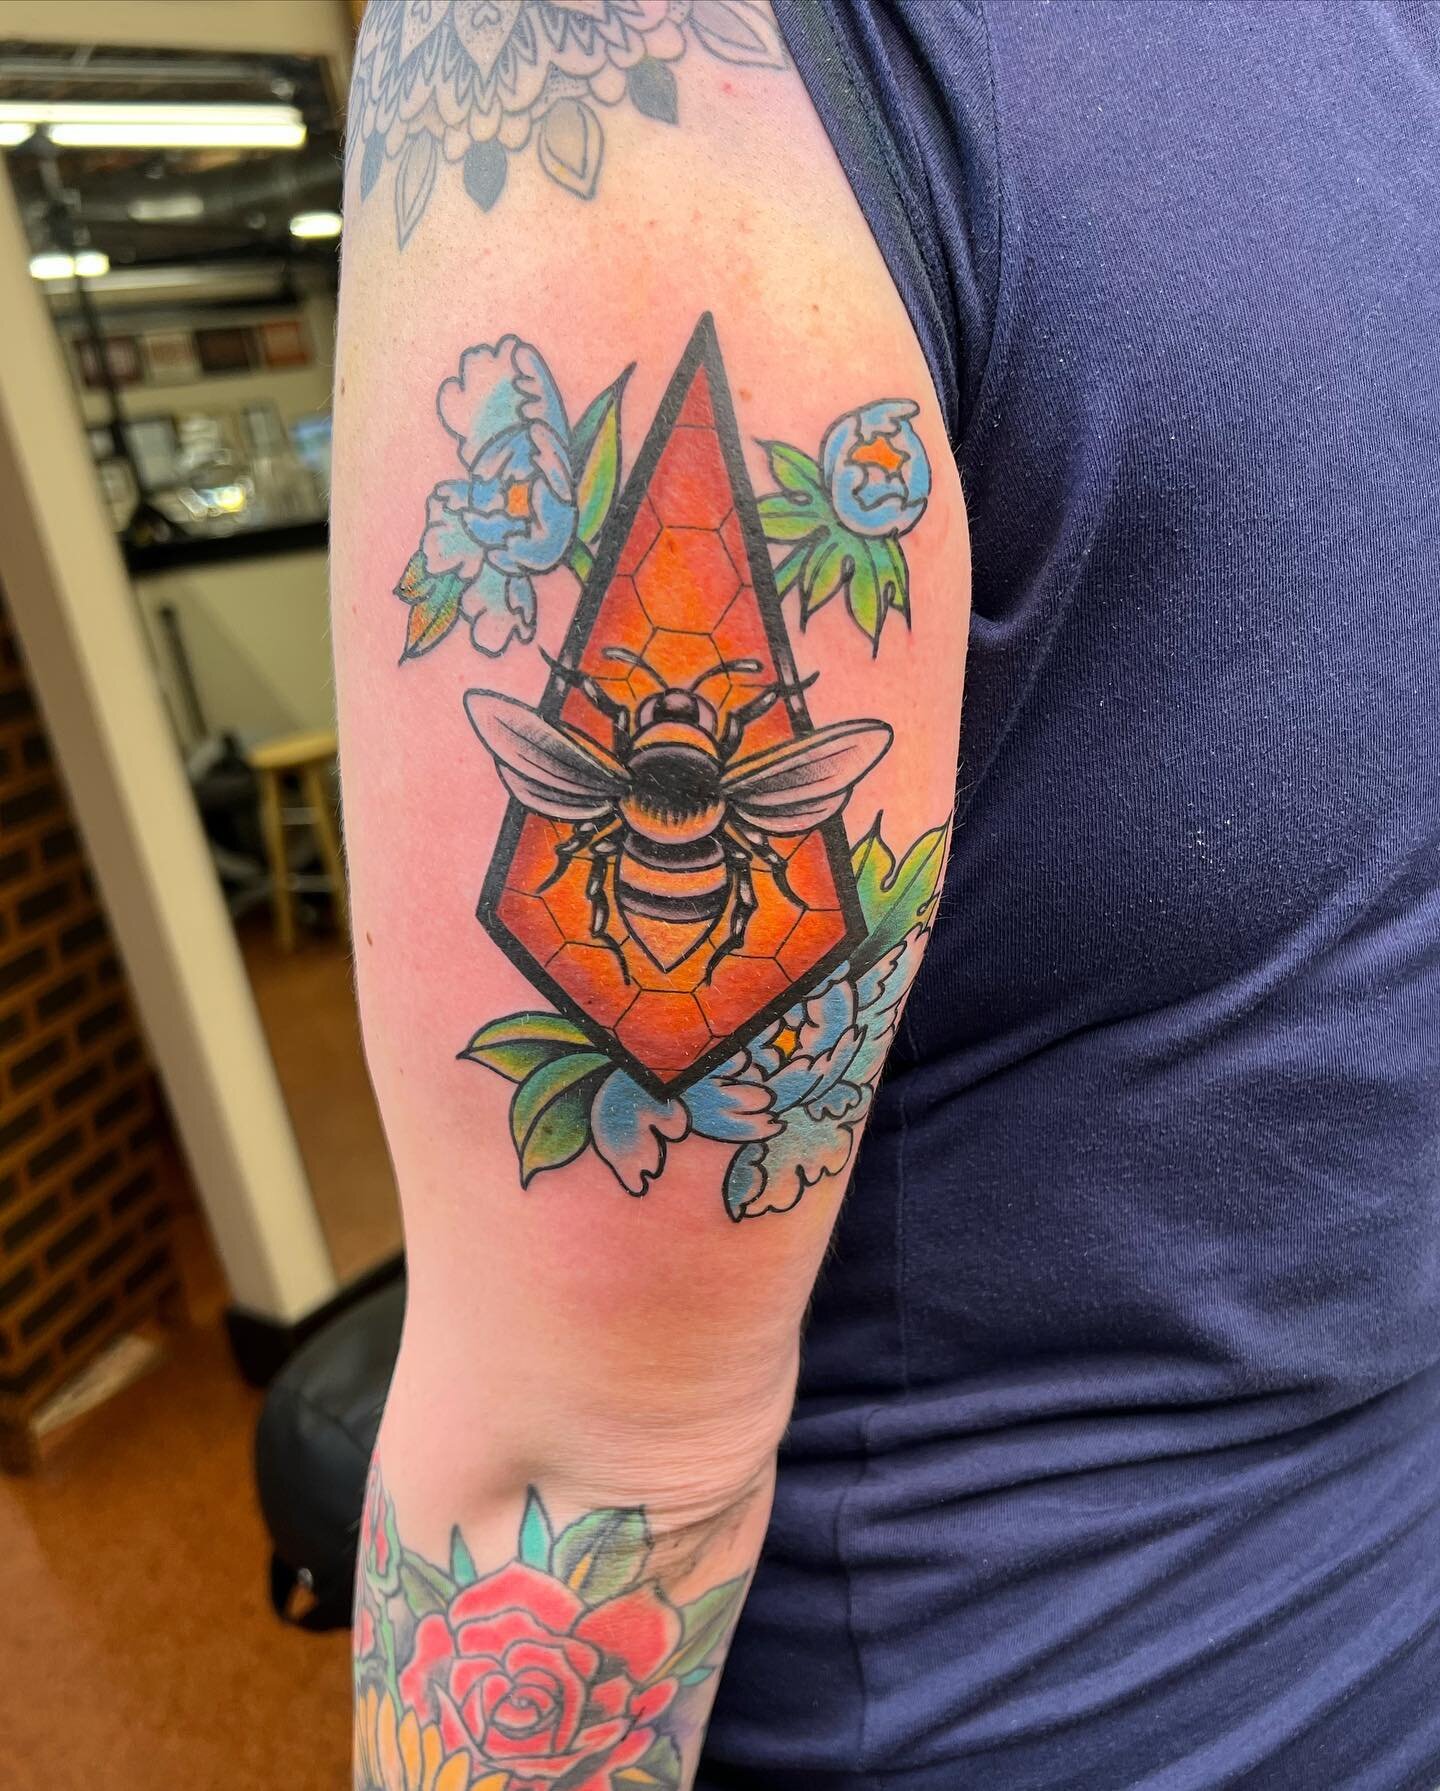 Don&rsquo;t bee shy, come get some new ink 🐝 
Bee tattoo done by @stevenleetattoos! 
If you&rsquo;re too buzz-y for a walk-in today, come set up an appointment!